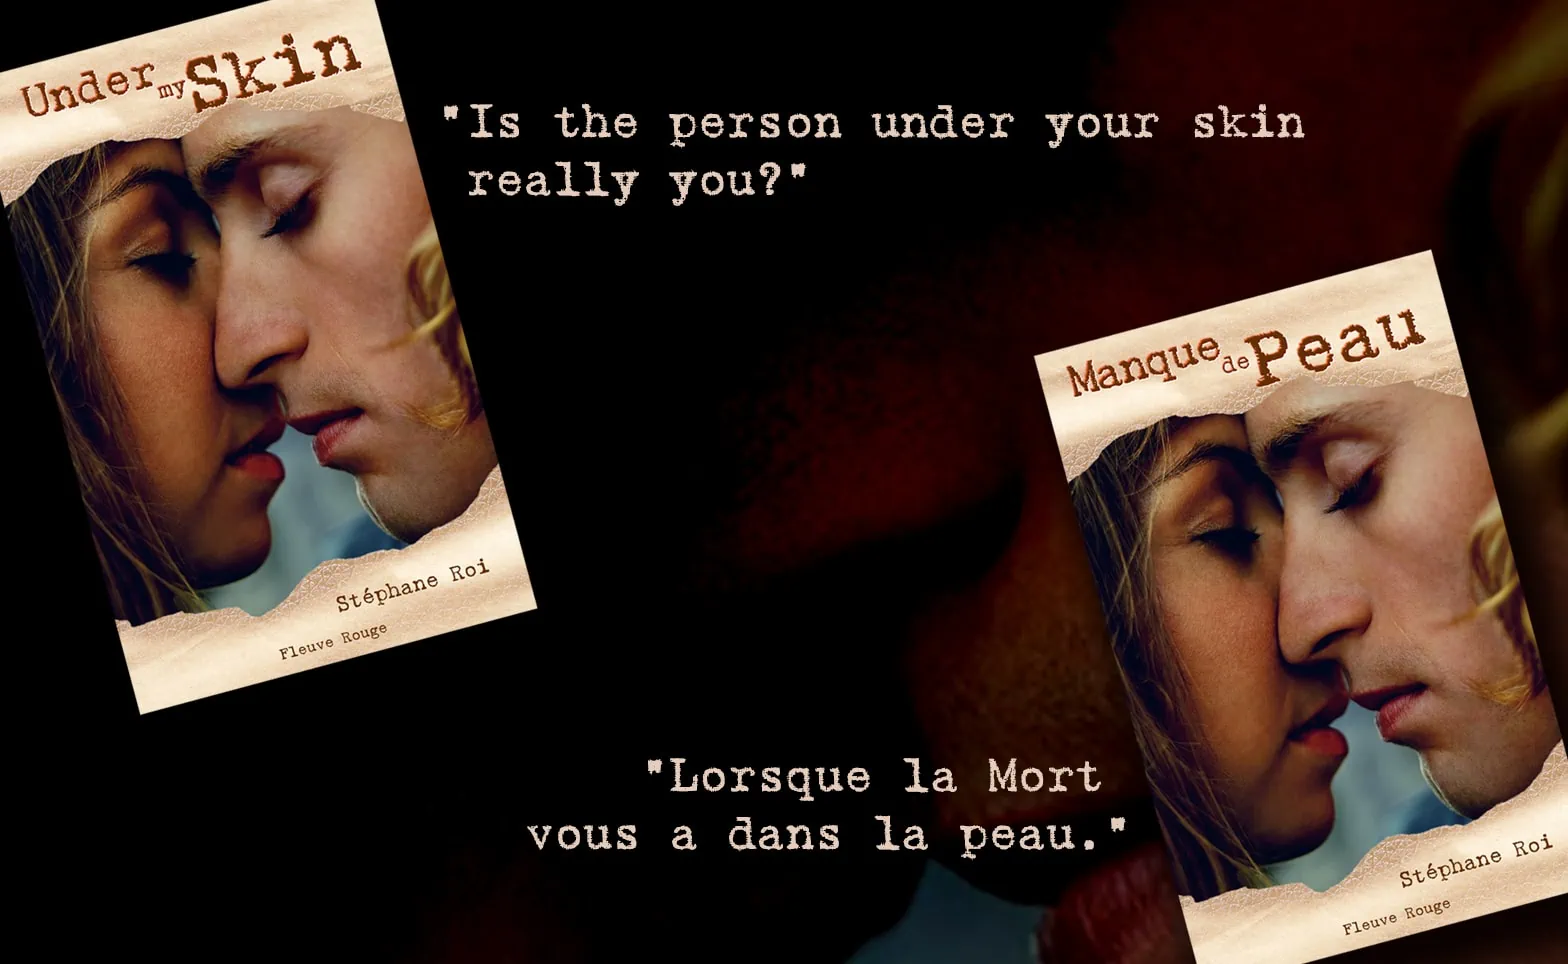 Building Stories and Images via Reciprocity #1: “Under my Skin” / “Manque de Peau”